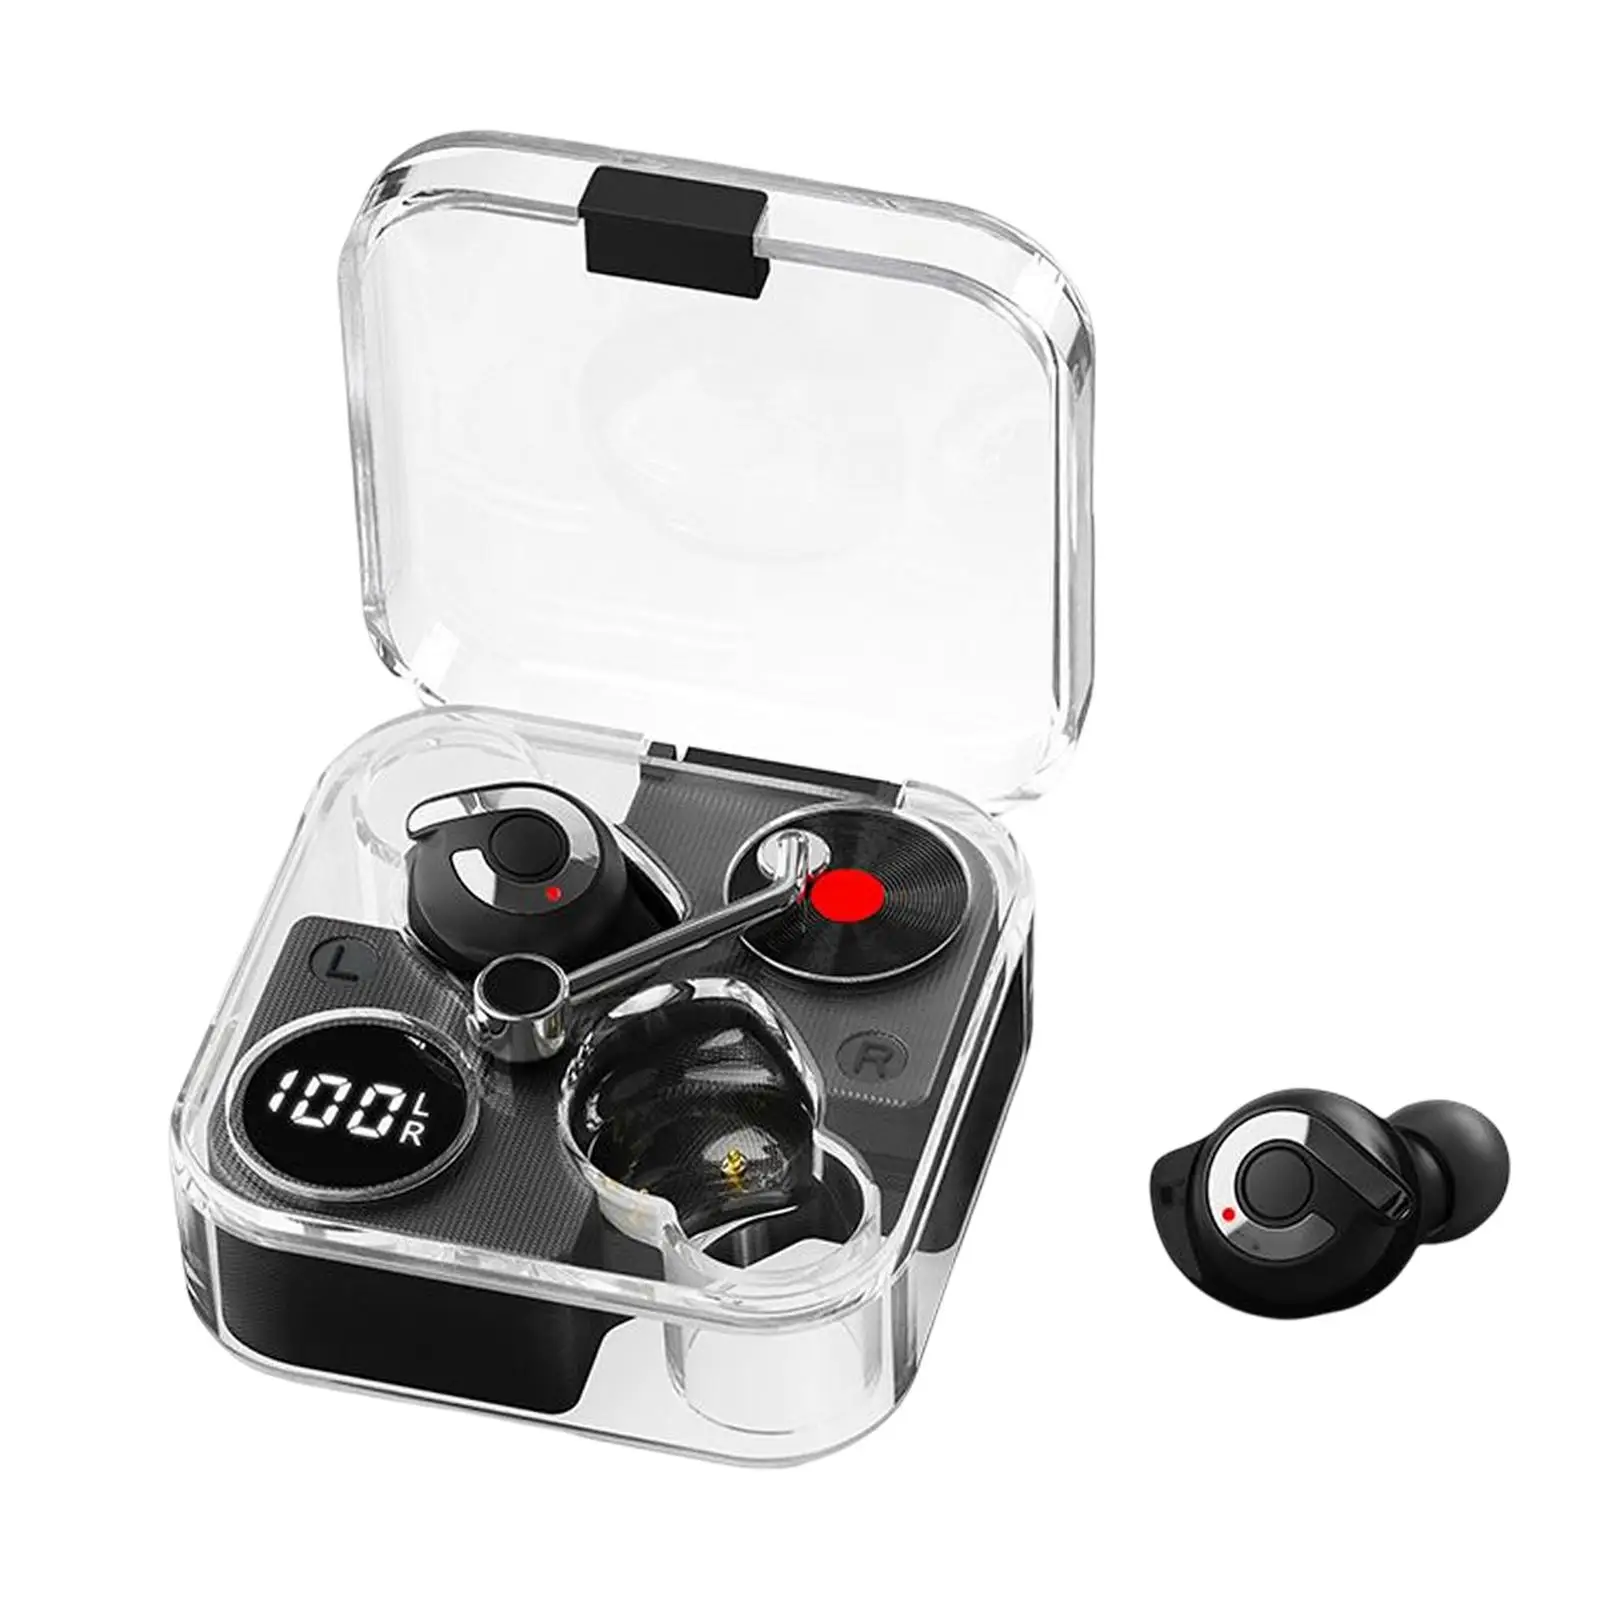 Portable Gaming Earphones Lightweight Low Latency Headphones Version 5.3 Stereo Sound Earphones for Sports Gym Working 